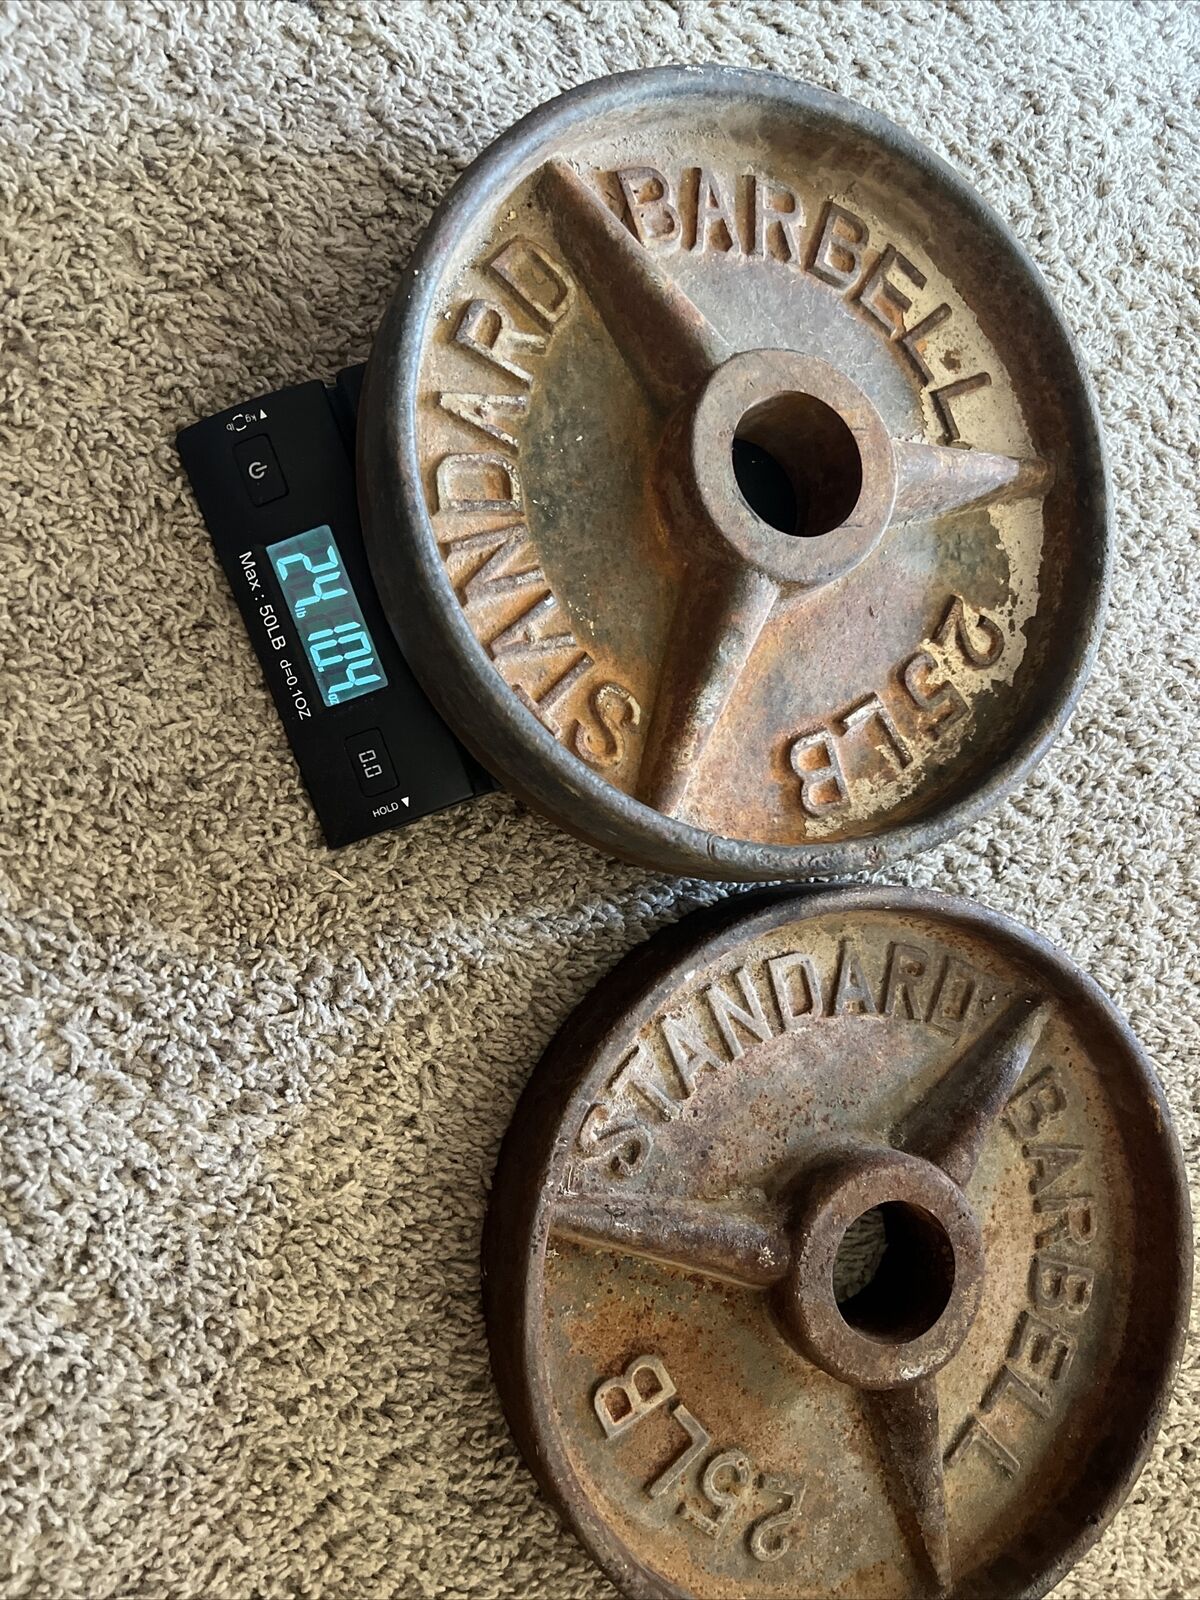 25 Pound Pair Vintage Iron Olympic Weight Plates Standard 25 LBS 11.3 KGS